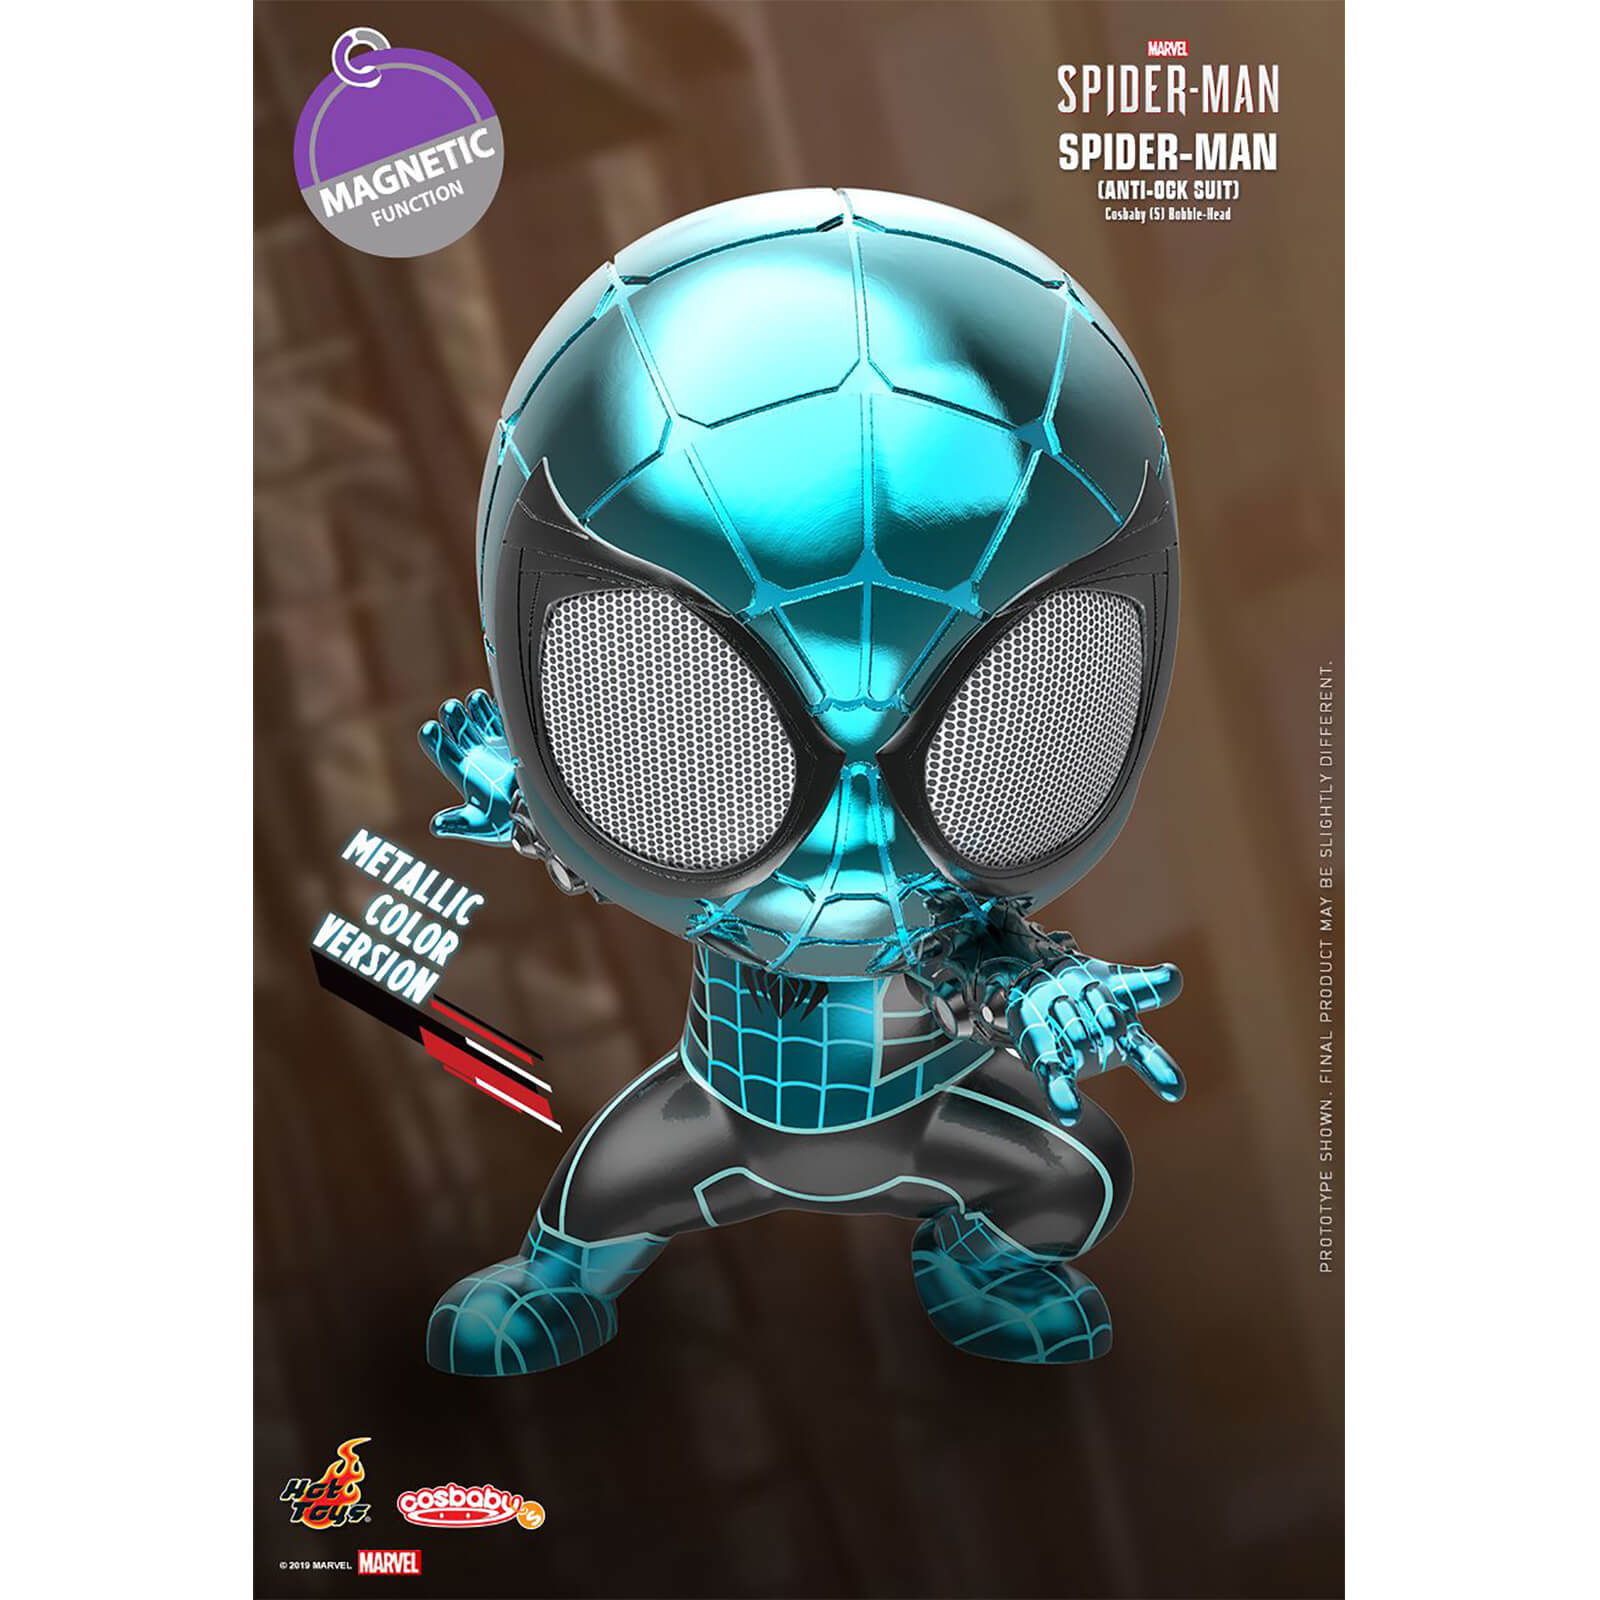 Image of Hot Toys Cosbaby Marvel's Spider-Man PS4 - Spider-Man (Fear Itself Suit Version) Figure